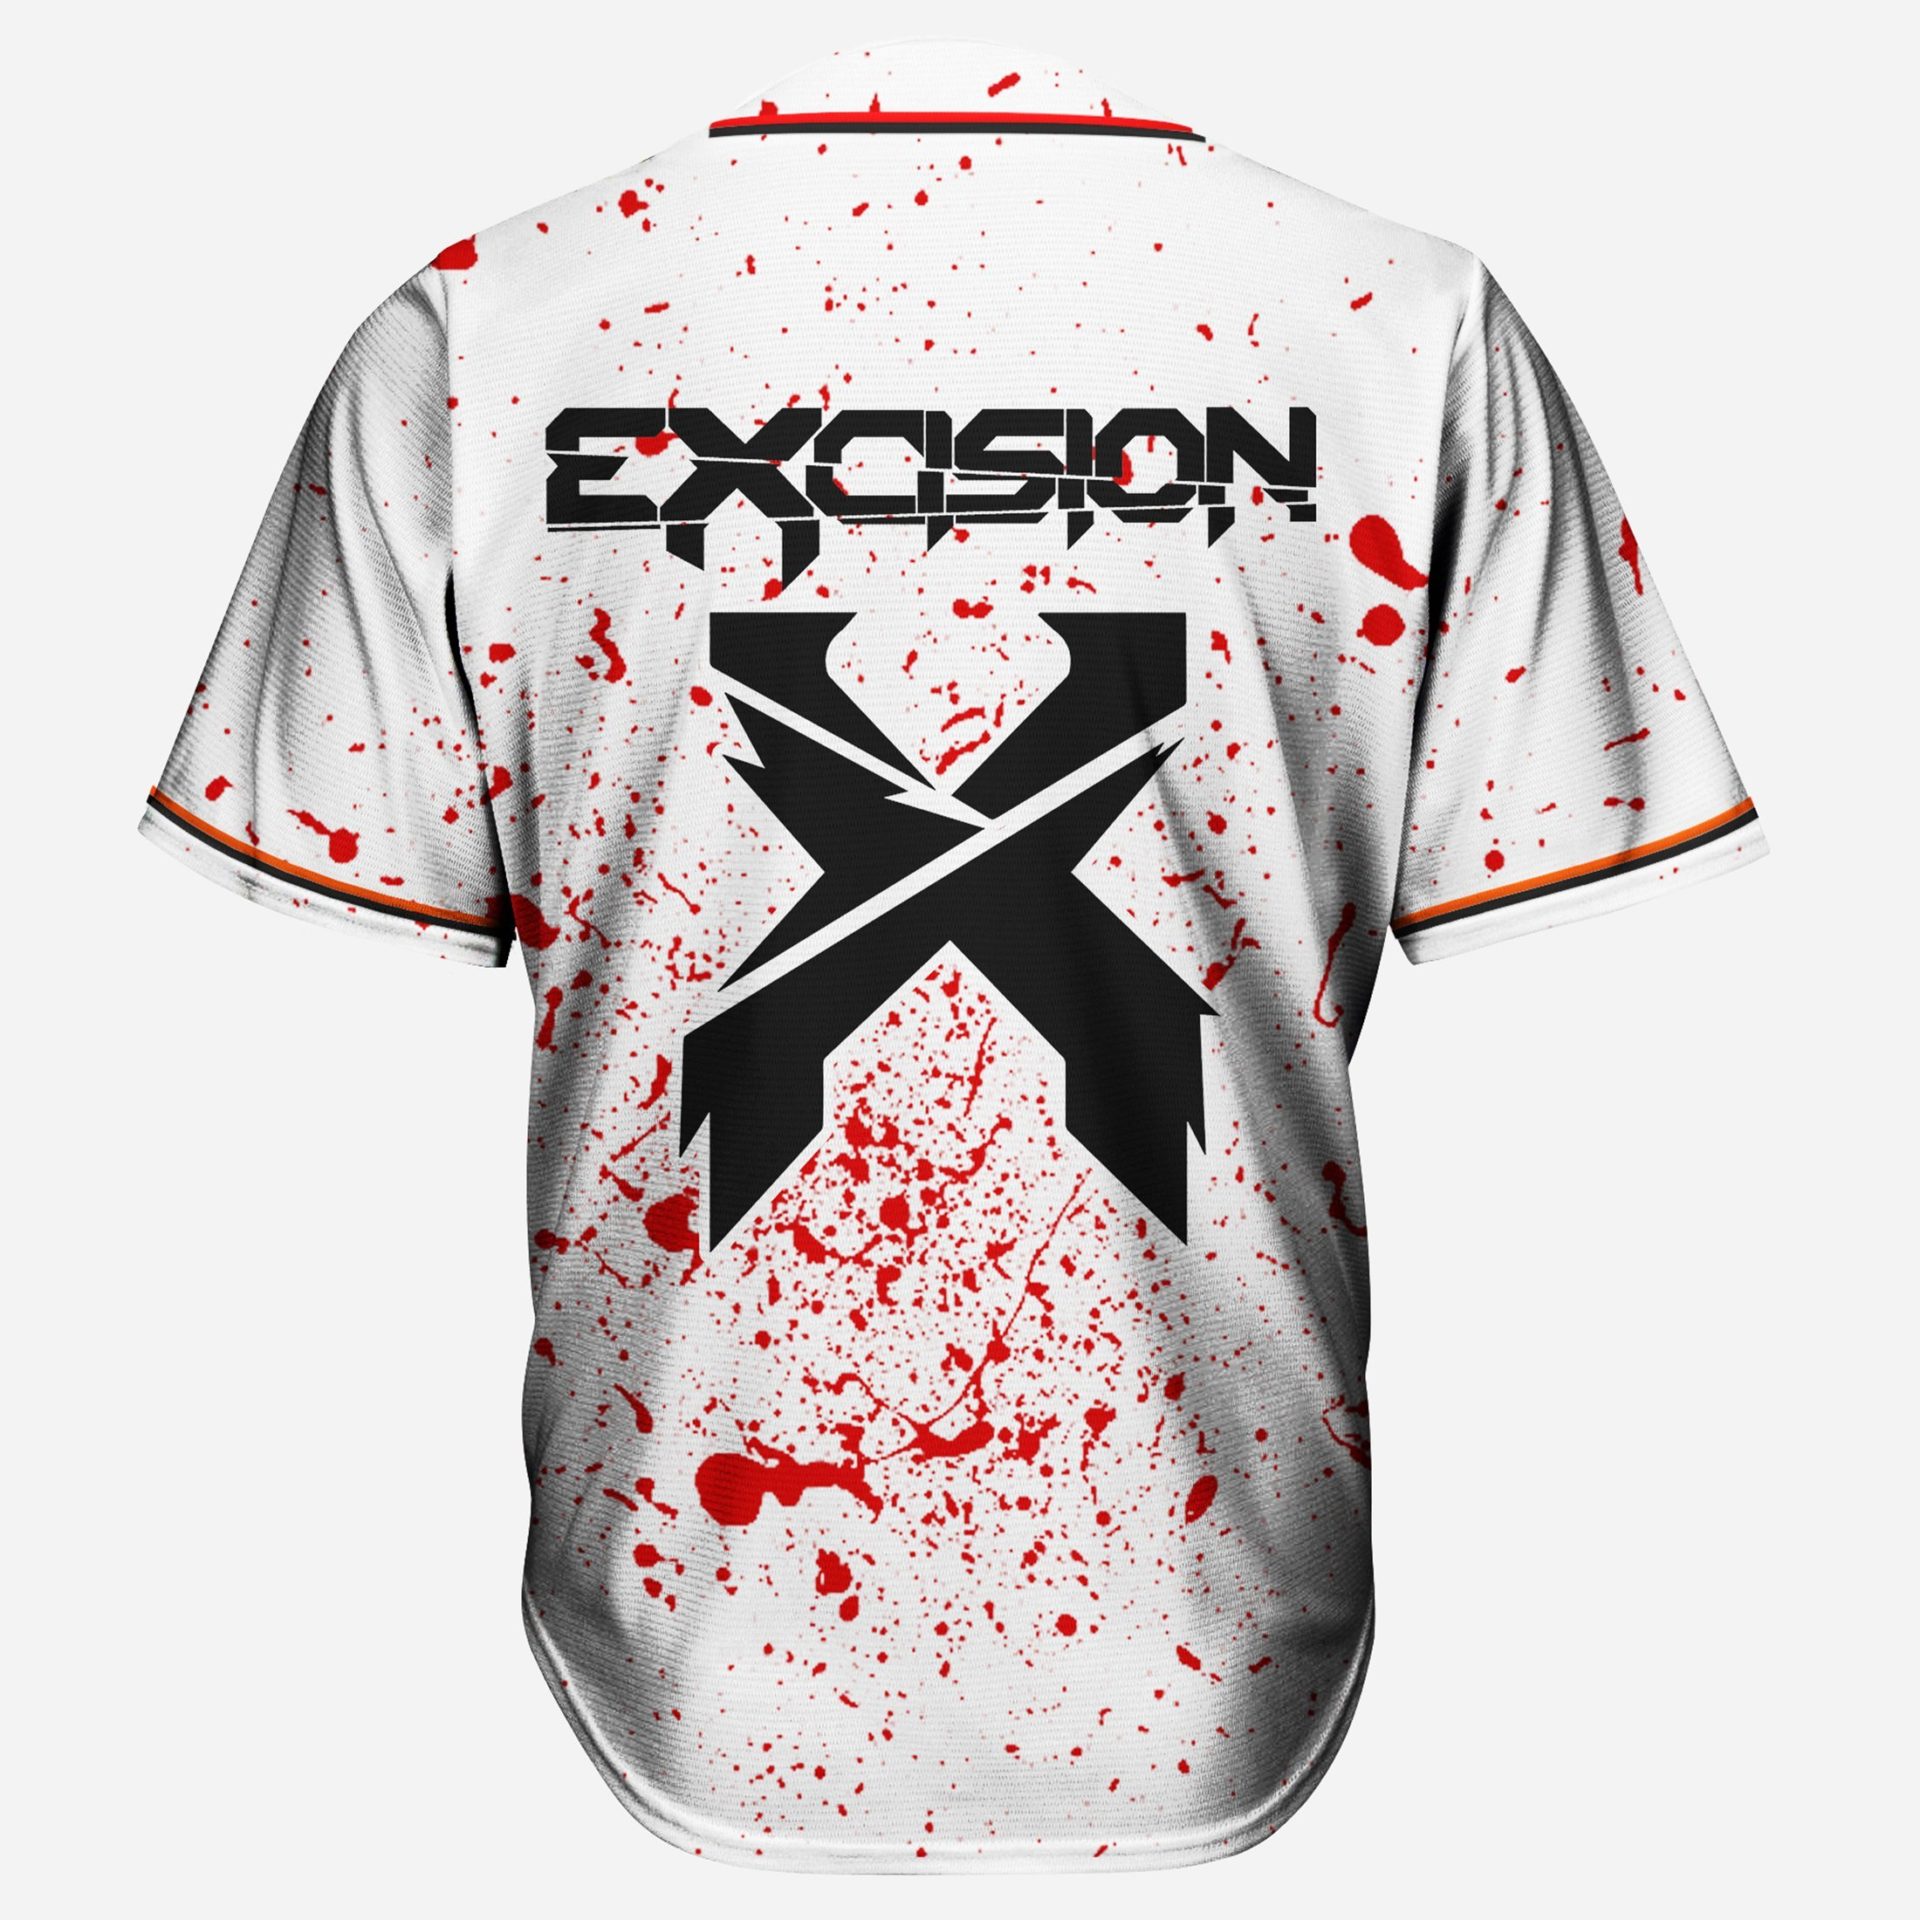 Excision blood rave jersey - Rave Jersey